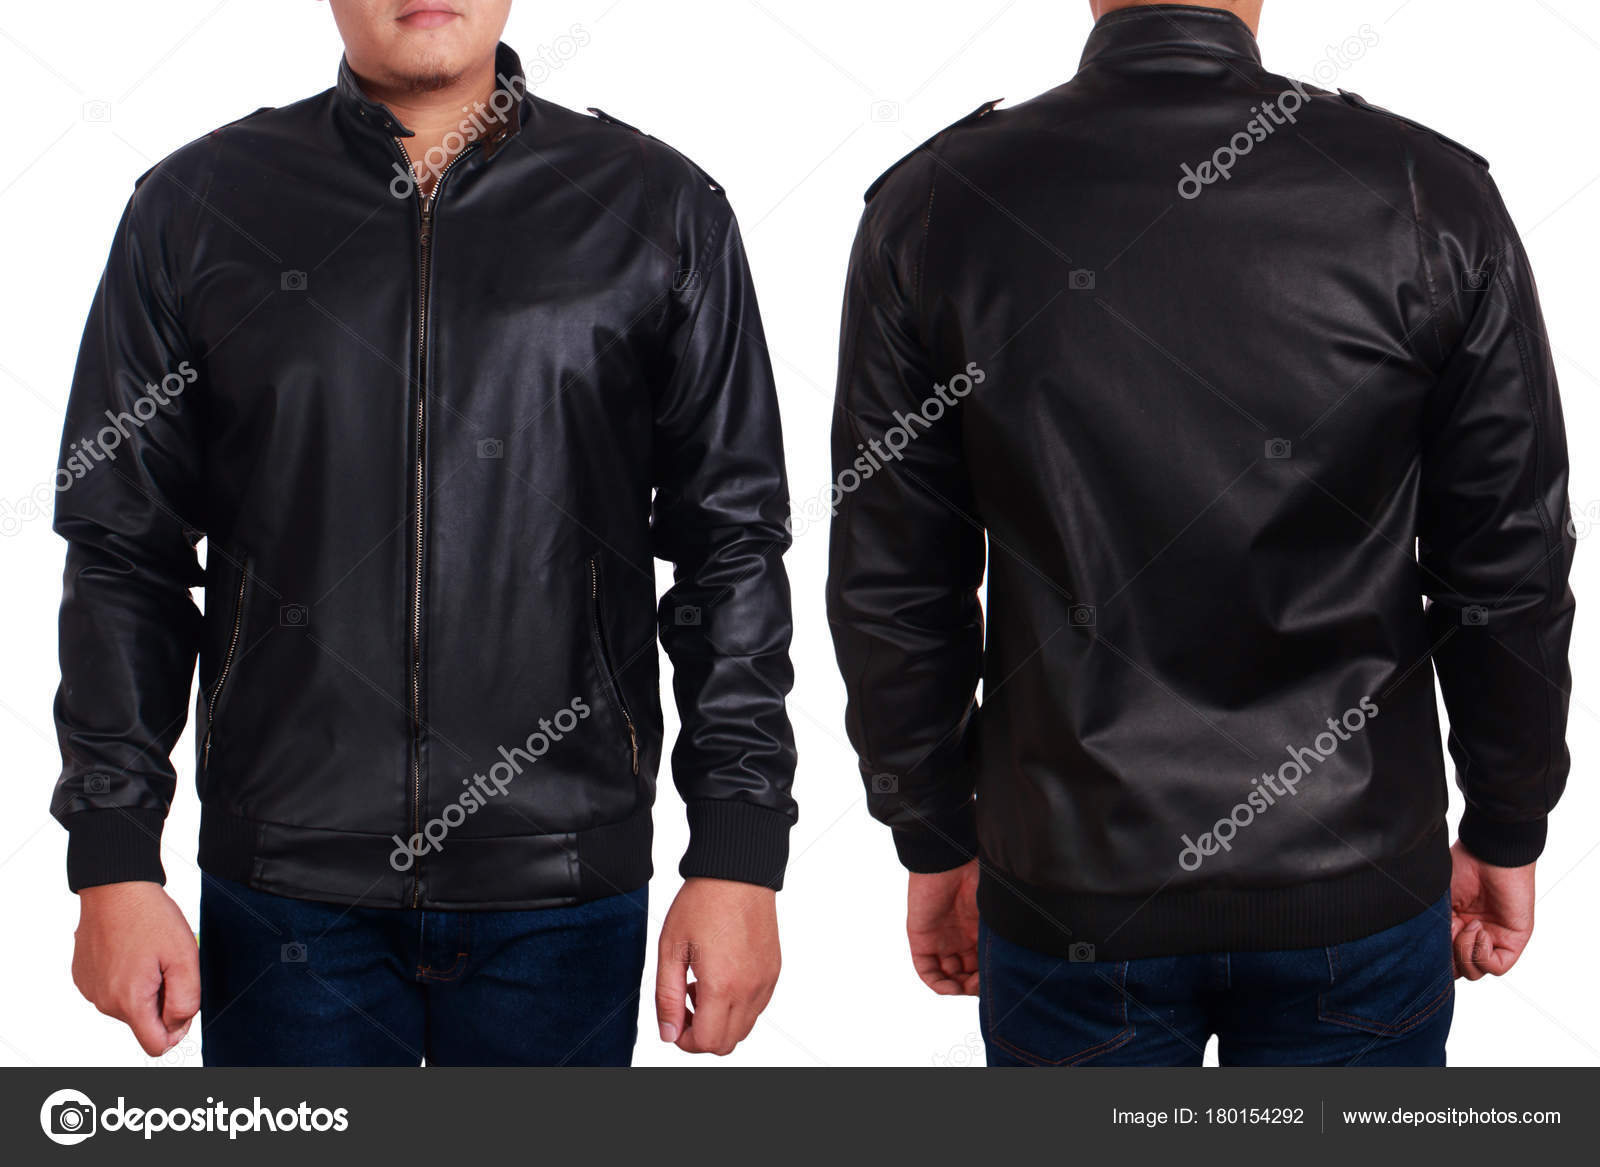 Download Black Leather Jacket Mockup Template Stock Photo Image By C Airdone 180154292